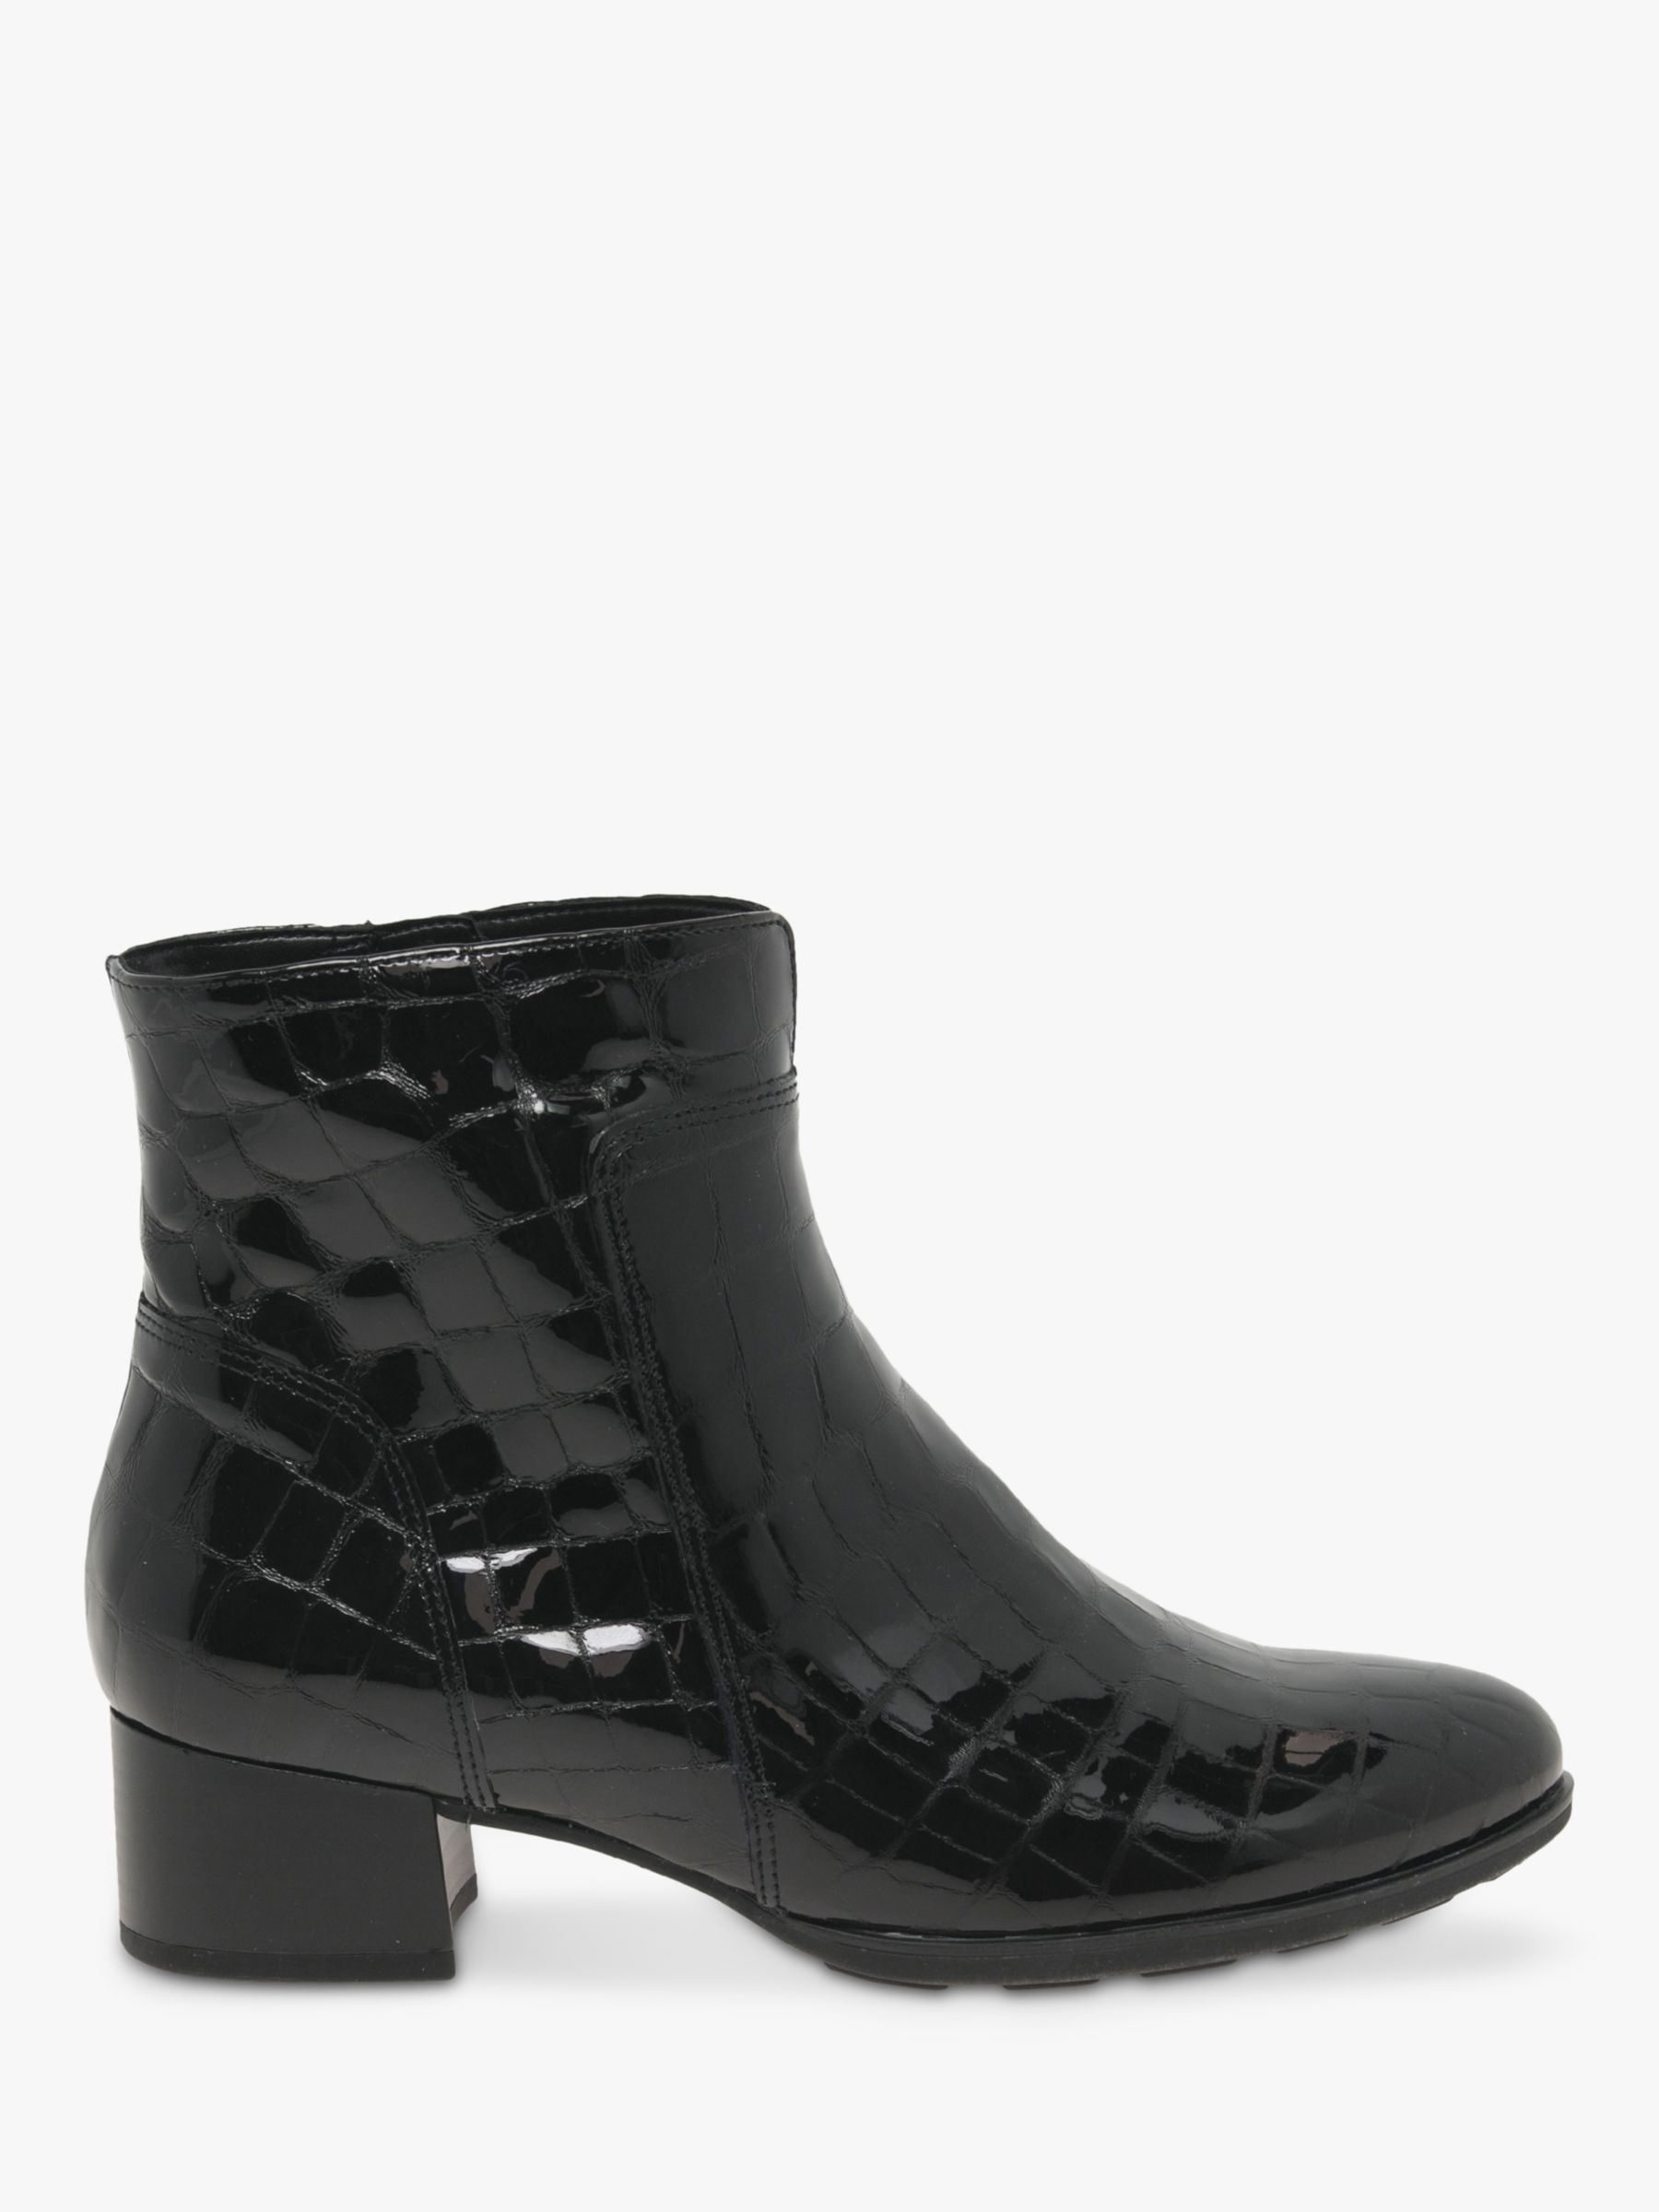 Gabor Delphino Patent Croc Leather Ankle Black at John Lewis Partners